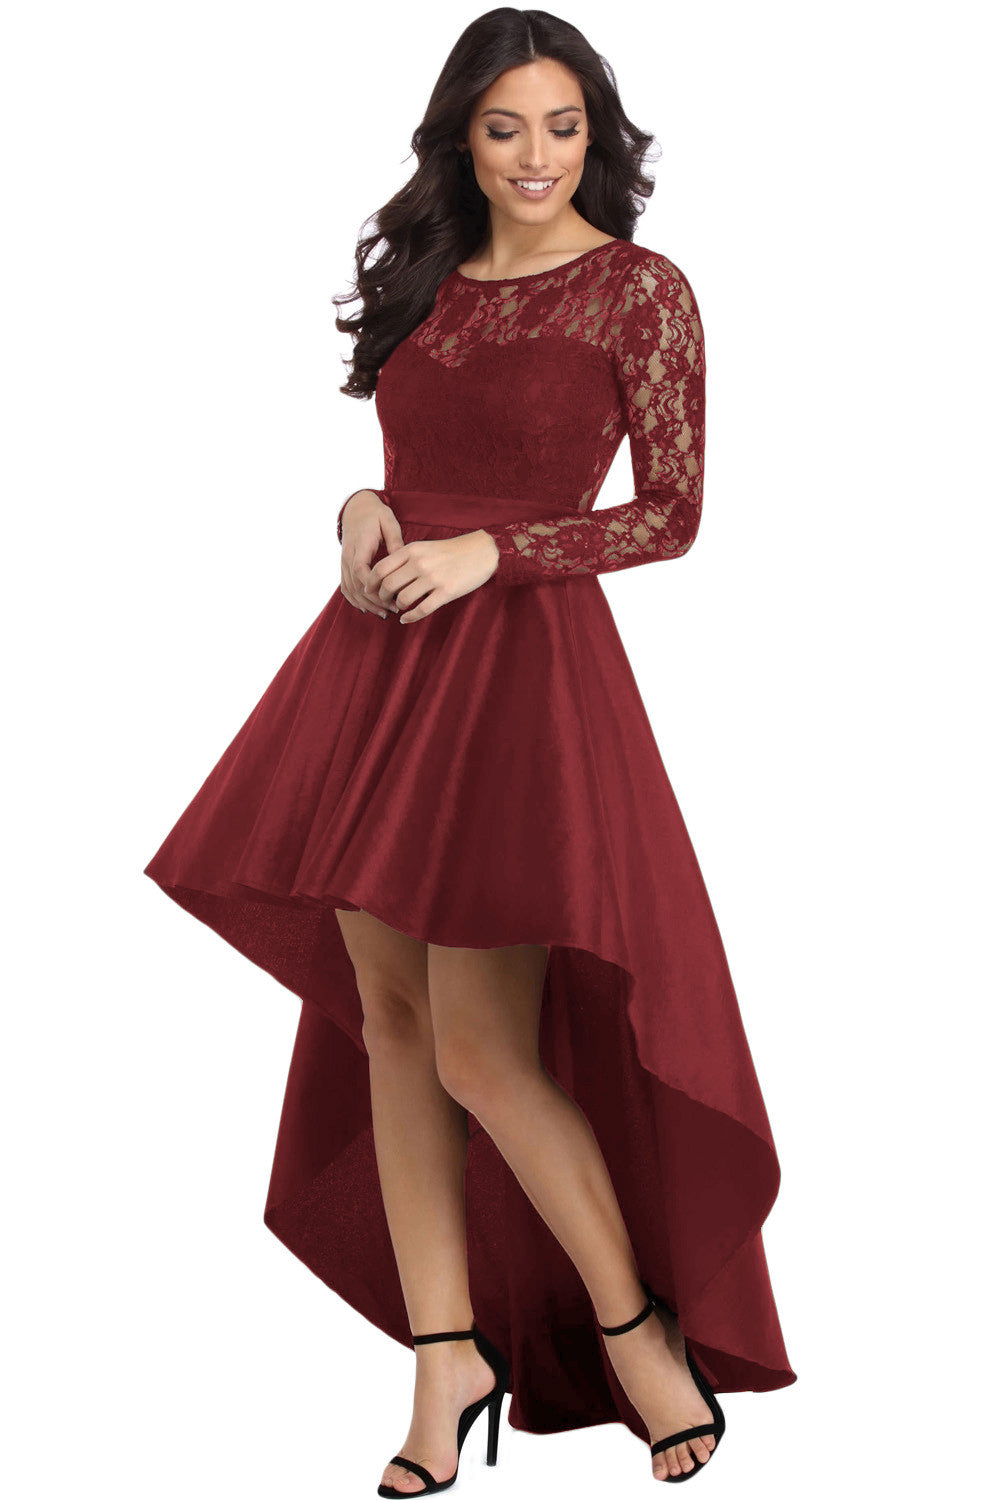 Long Sleeve Lace High Low Satin Prom Dress